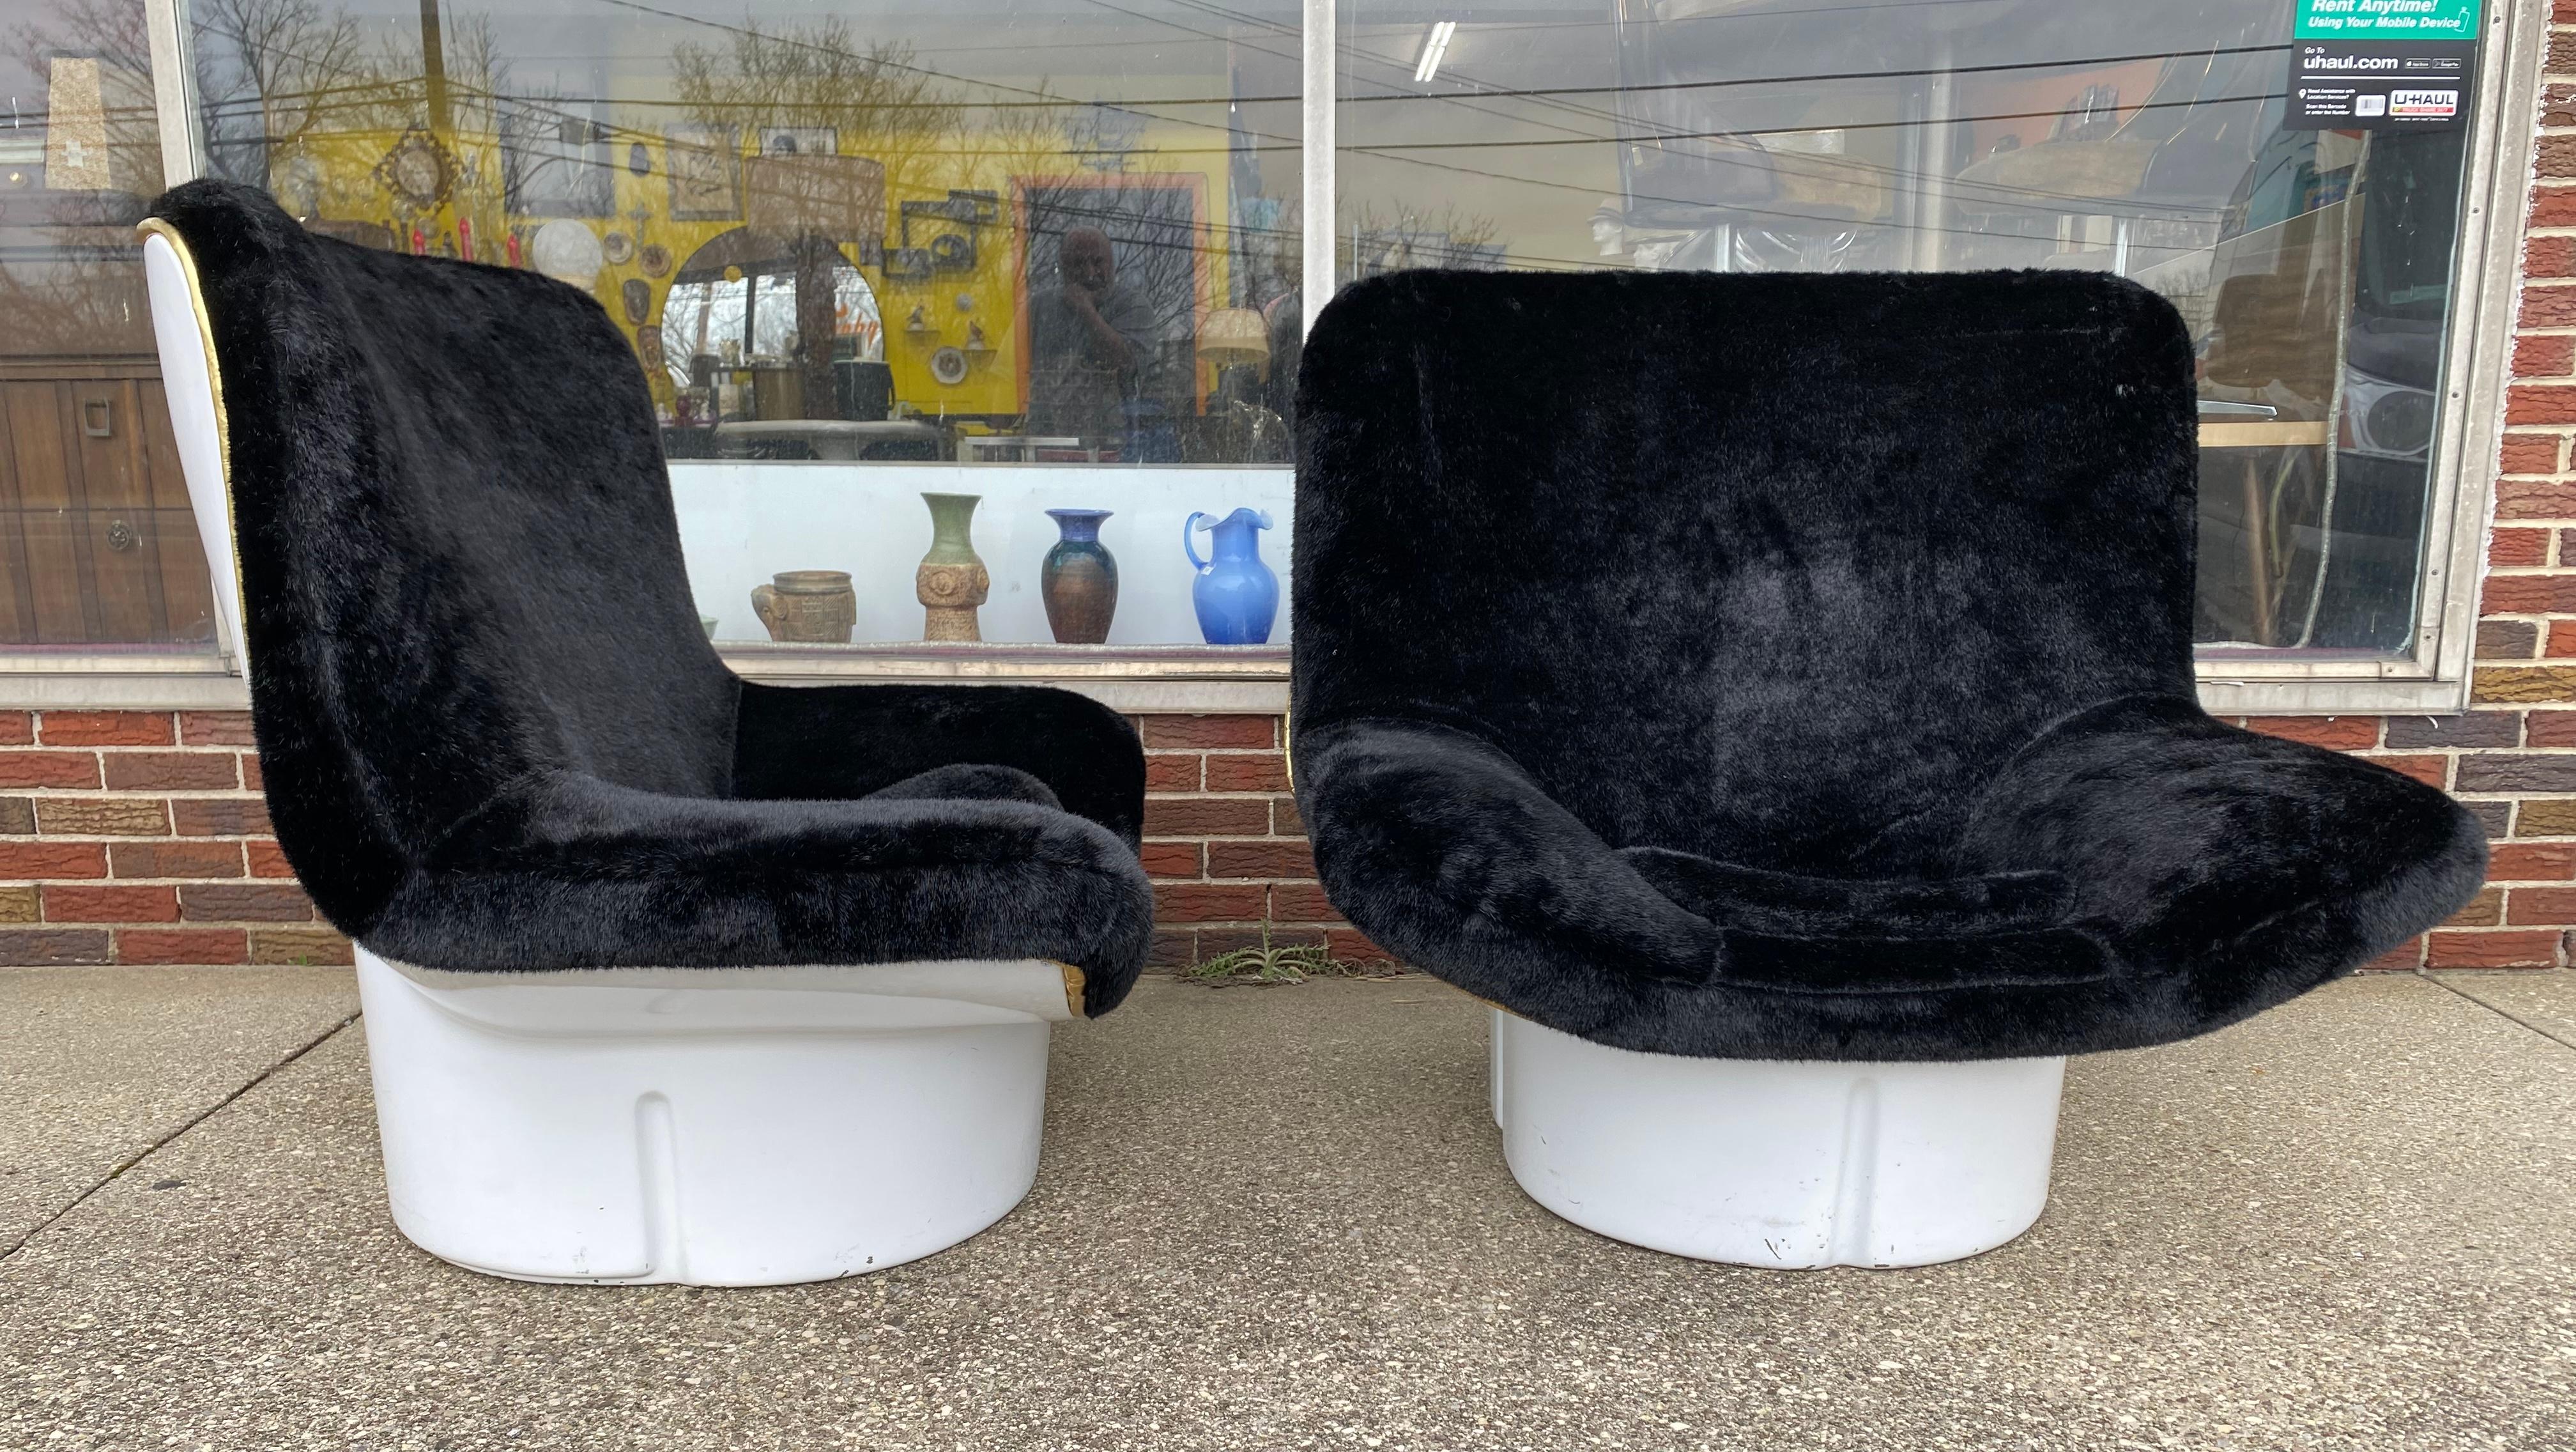 Matched Pair of Lounge chair by Titina Ammanati and Giam Paolo Vitelli for Comfort, Italy, 1970s.

IL Poltrone model lounge chairs by T. Ammanati & G.P. Vitelli in the early 1970s, part of the comfort 175 series, Made of fiberglass and black faux